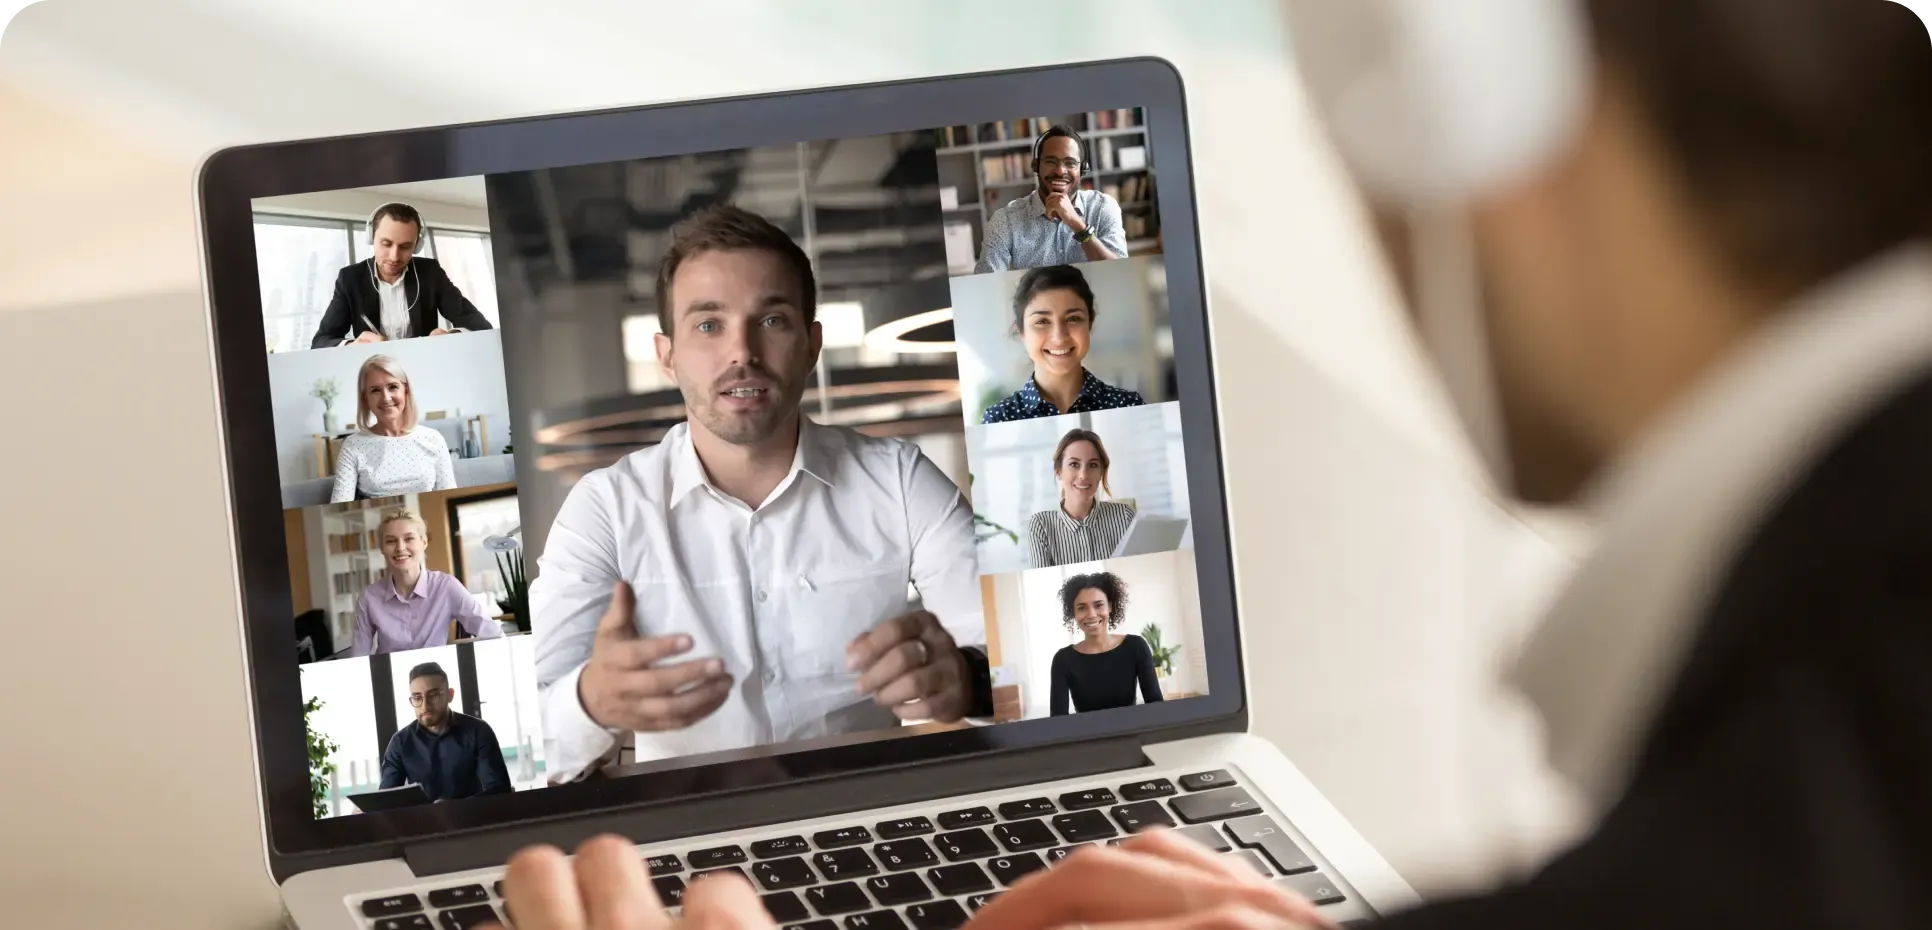 Man giving presentation on video conference